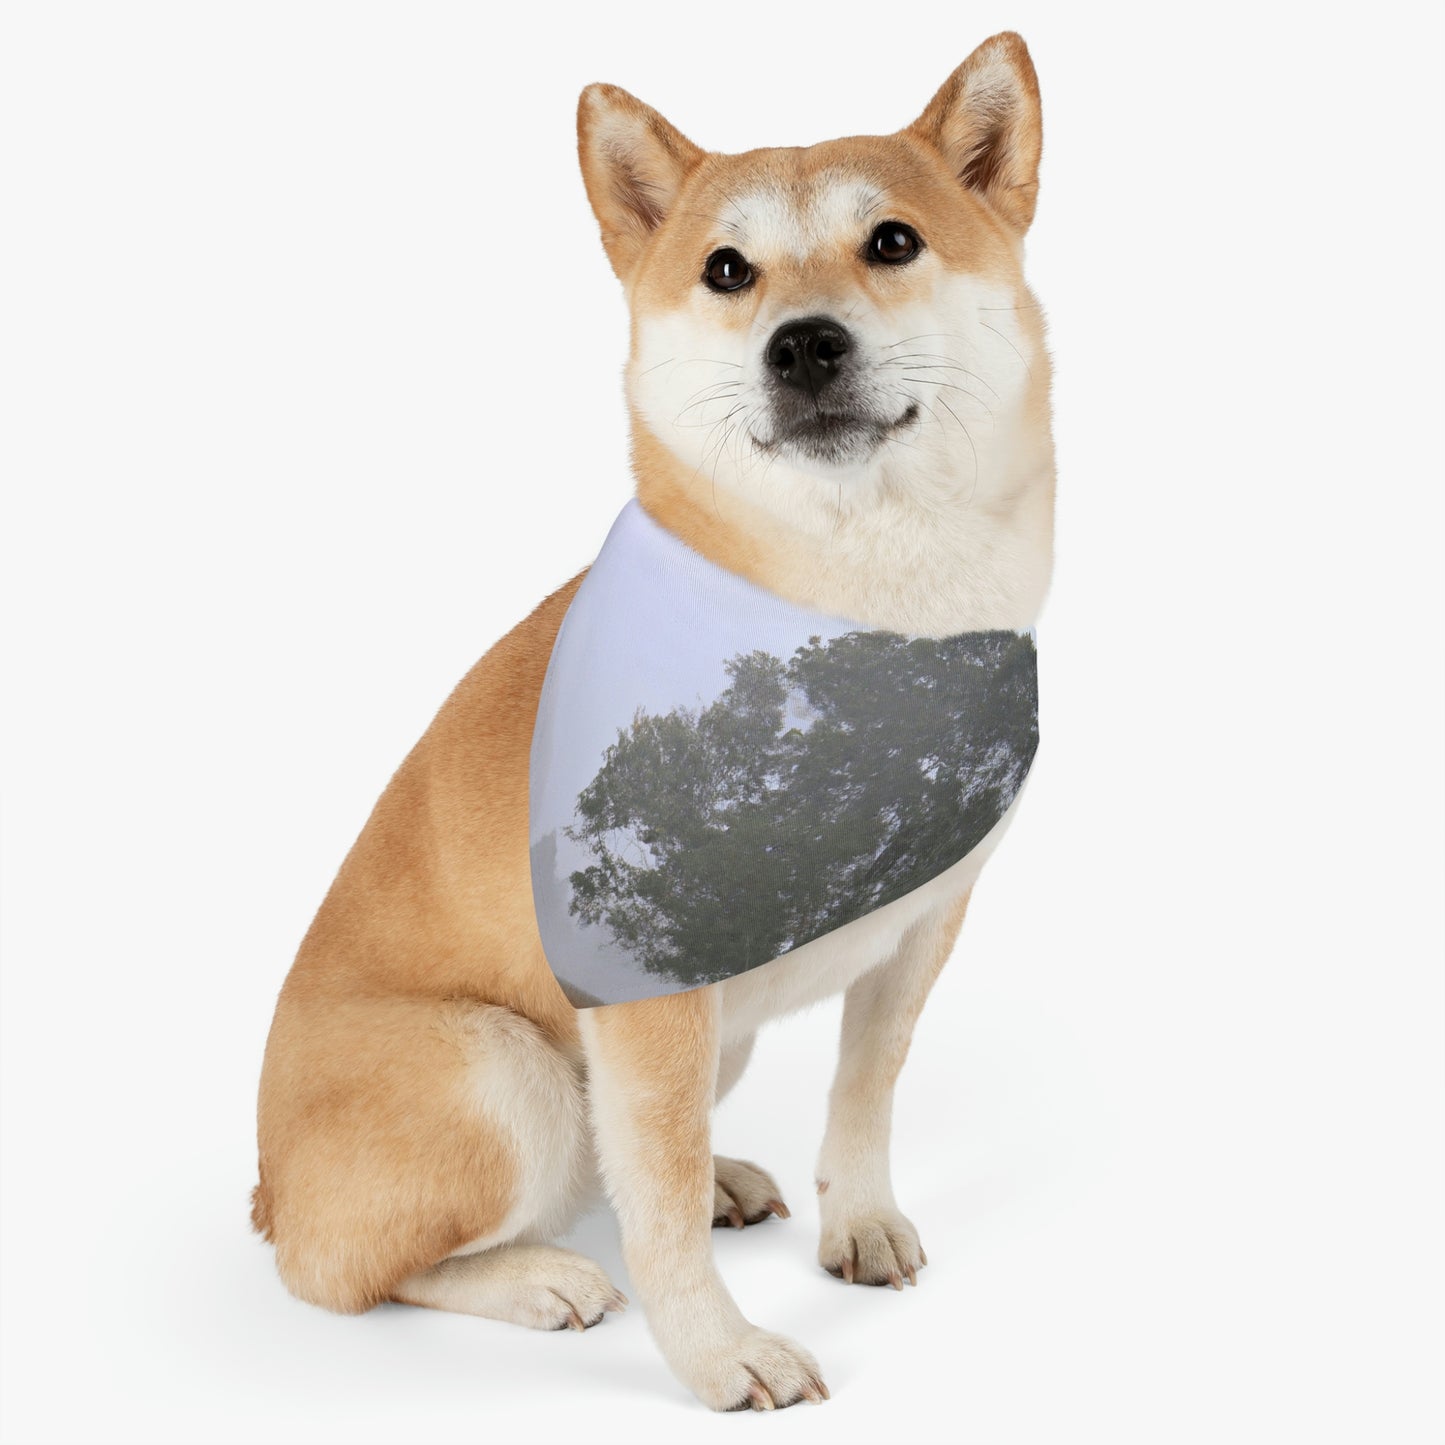 The Lonely Tree in the Foggy Meadow - The Alien Pet Bandana Collar